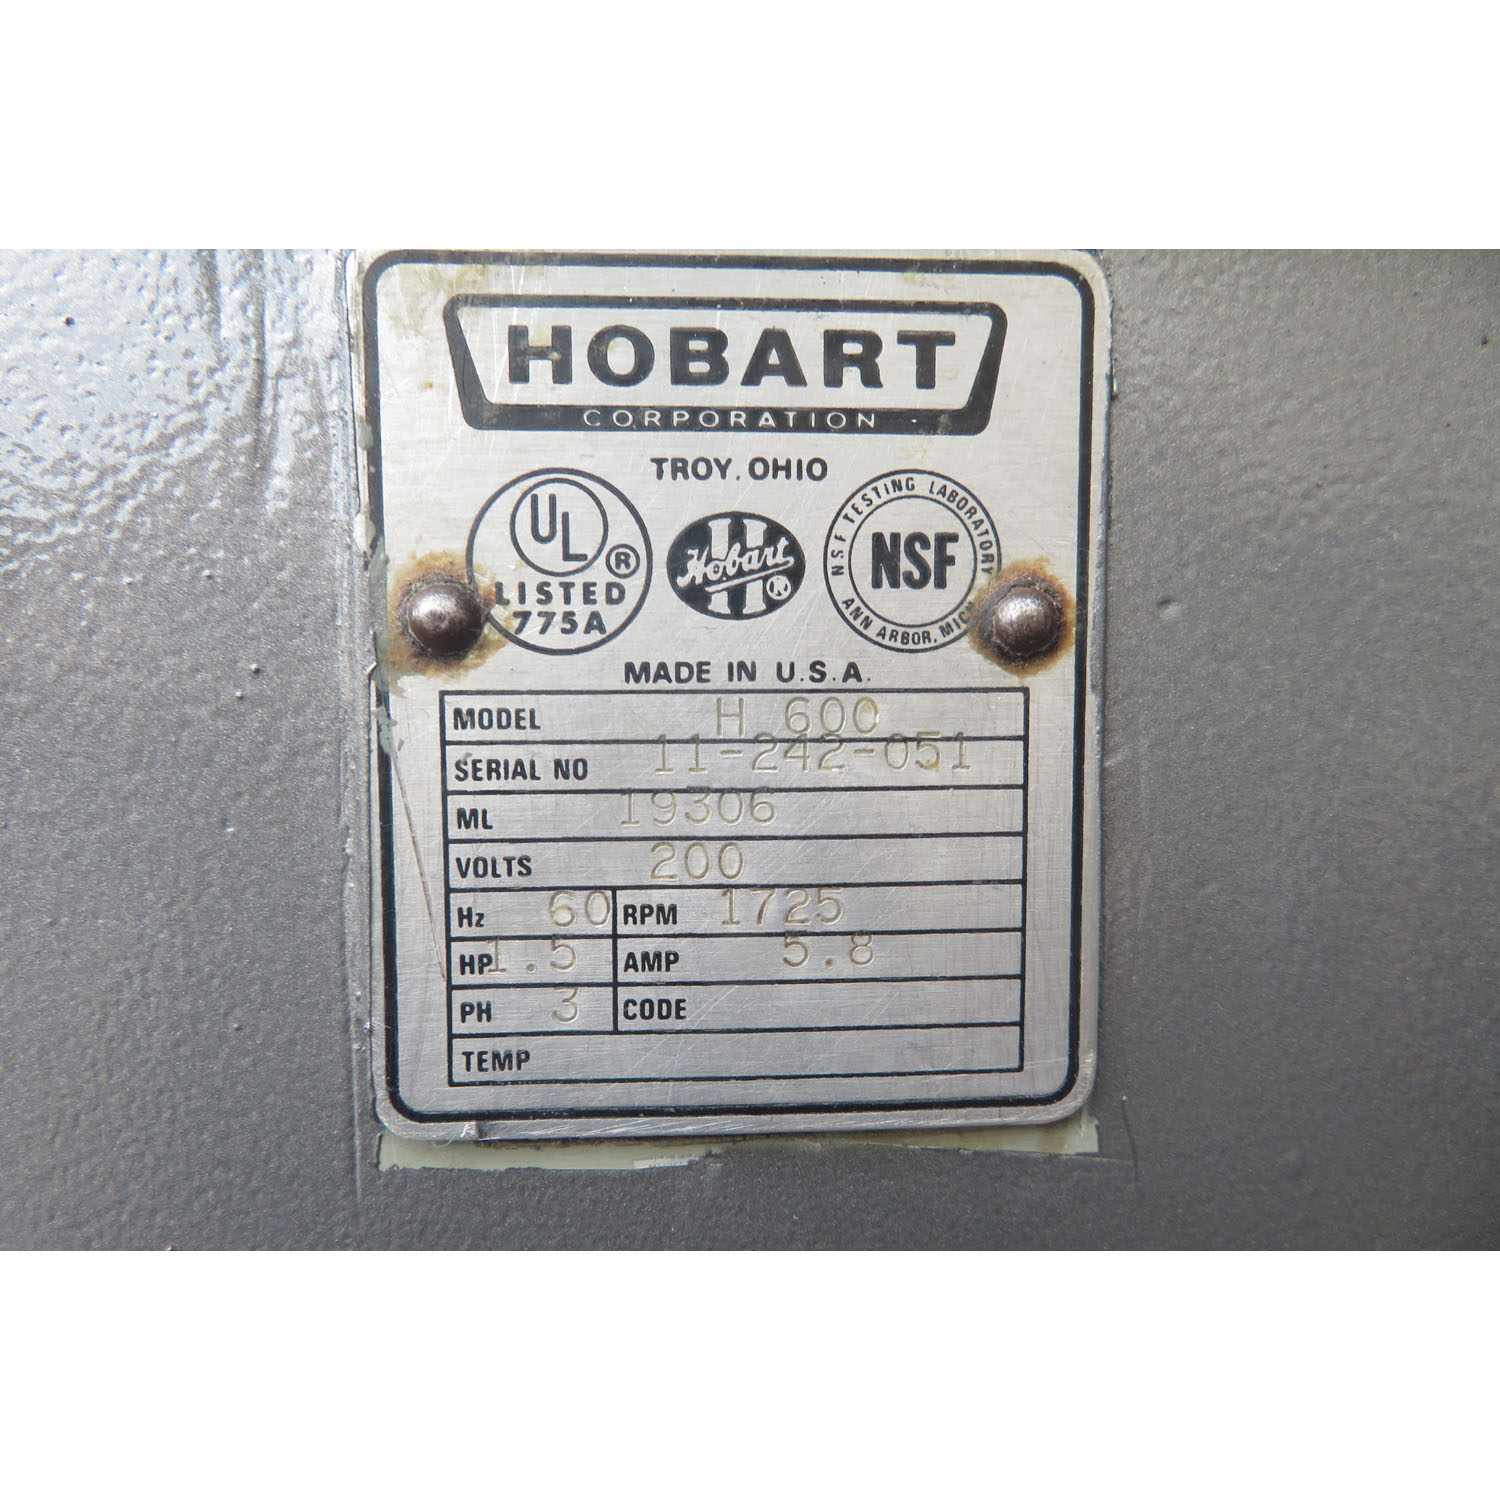 Hobart 60 Quart H600 Mixer, Used Excellent Condition image 4